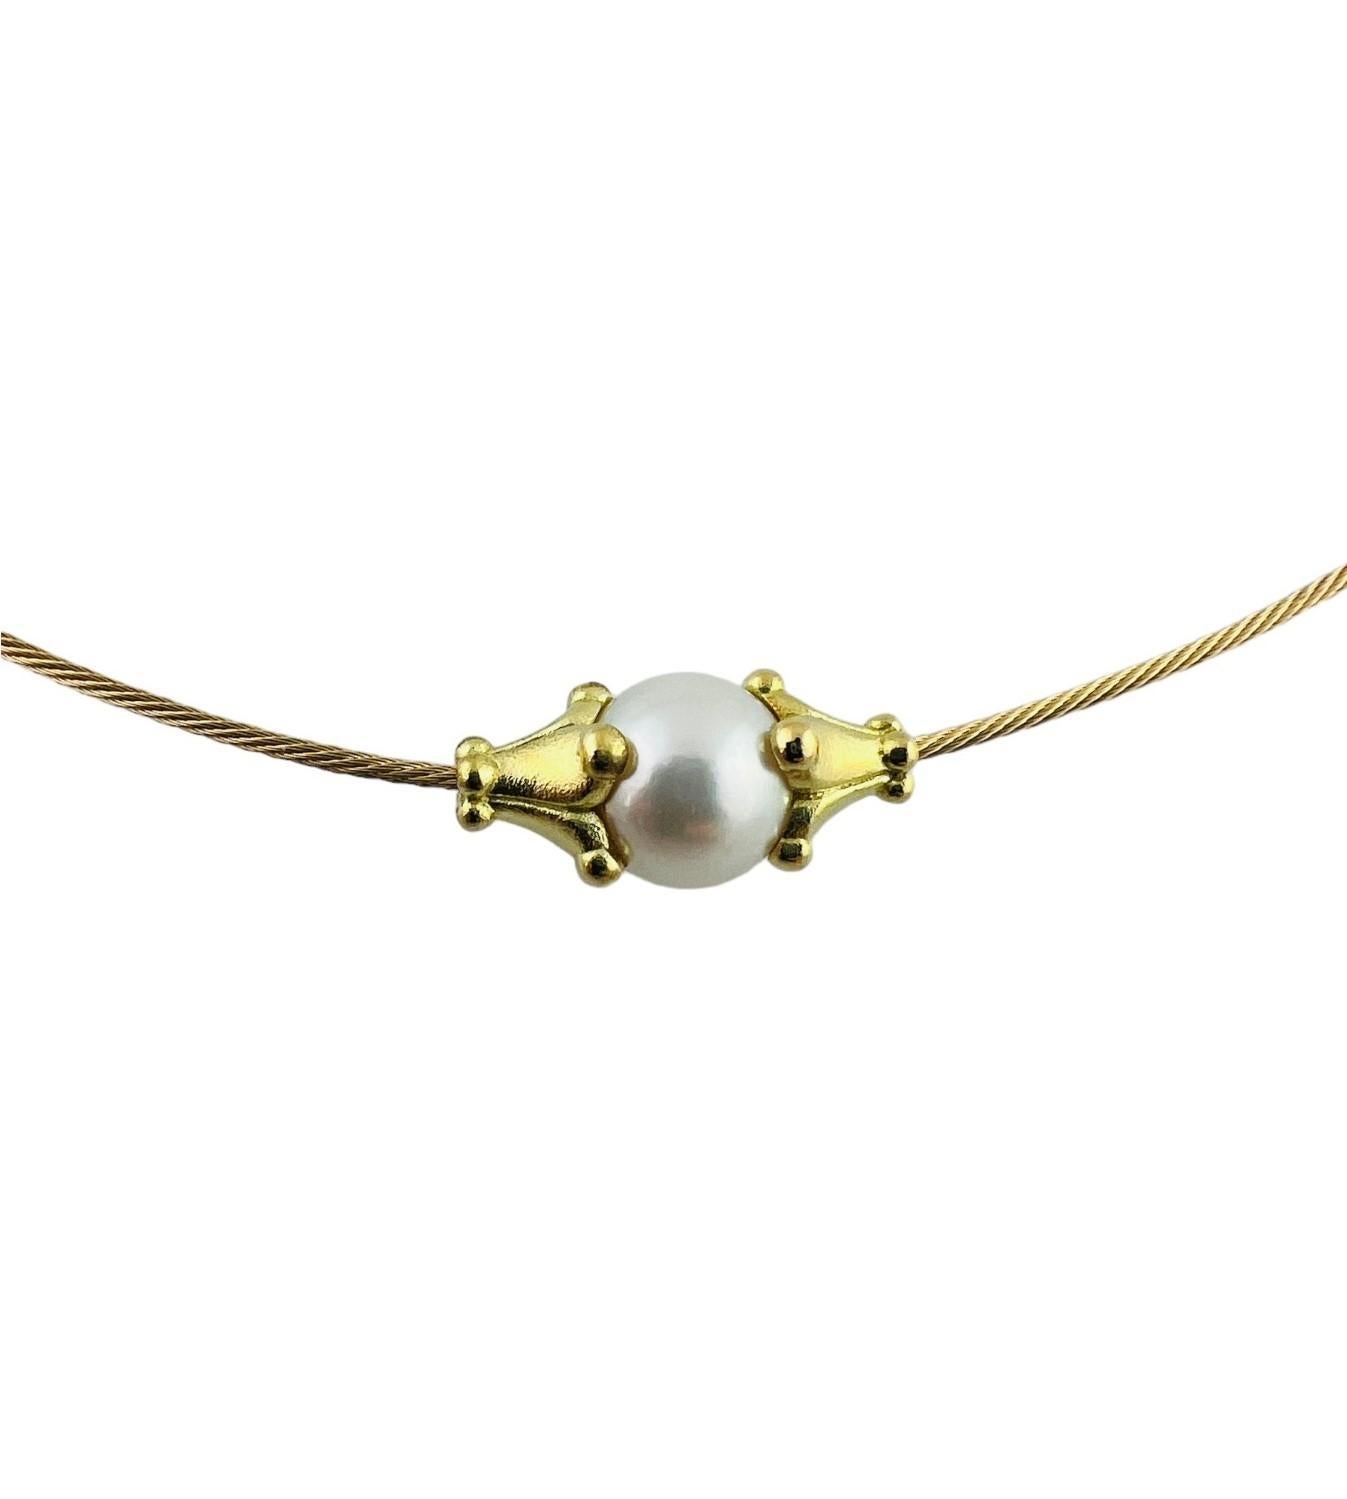 Paul Morelli 18 Karat Yellow Gold And Pearl Necklace-

This elegant necklace by Paul Morelli features one round white pearl (9 mm) set in beautifully detailed 18K yellow gold.

Size: 16 inches

Weight:   7.0 gr./  4.5 dwt.

Hallmark:  Morelli